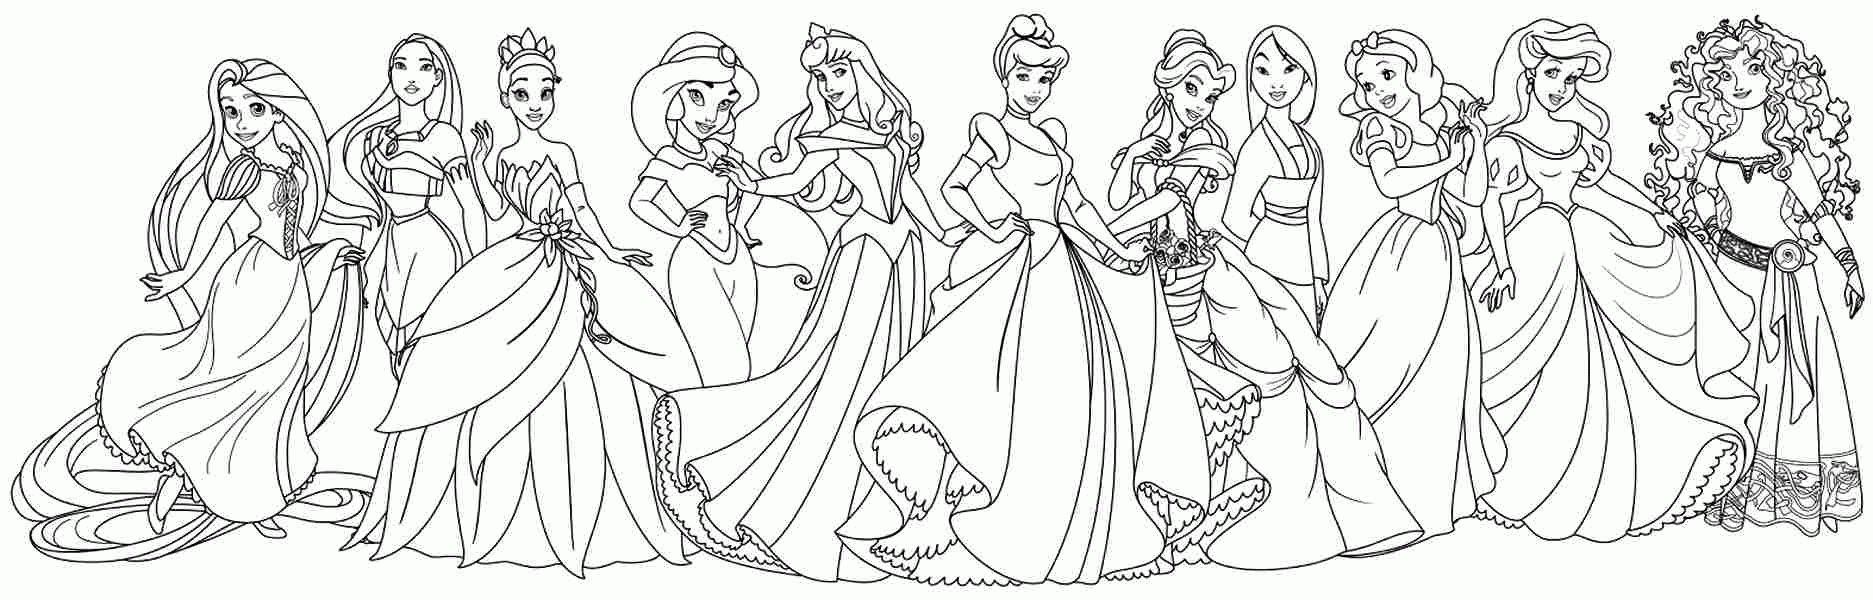 Free Coloring Pages For Disney Princesses, Download Free Coloring ...